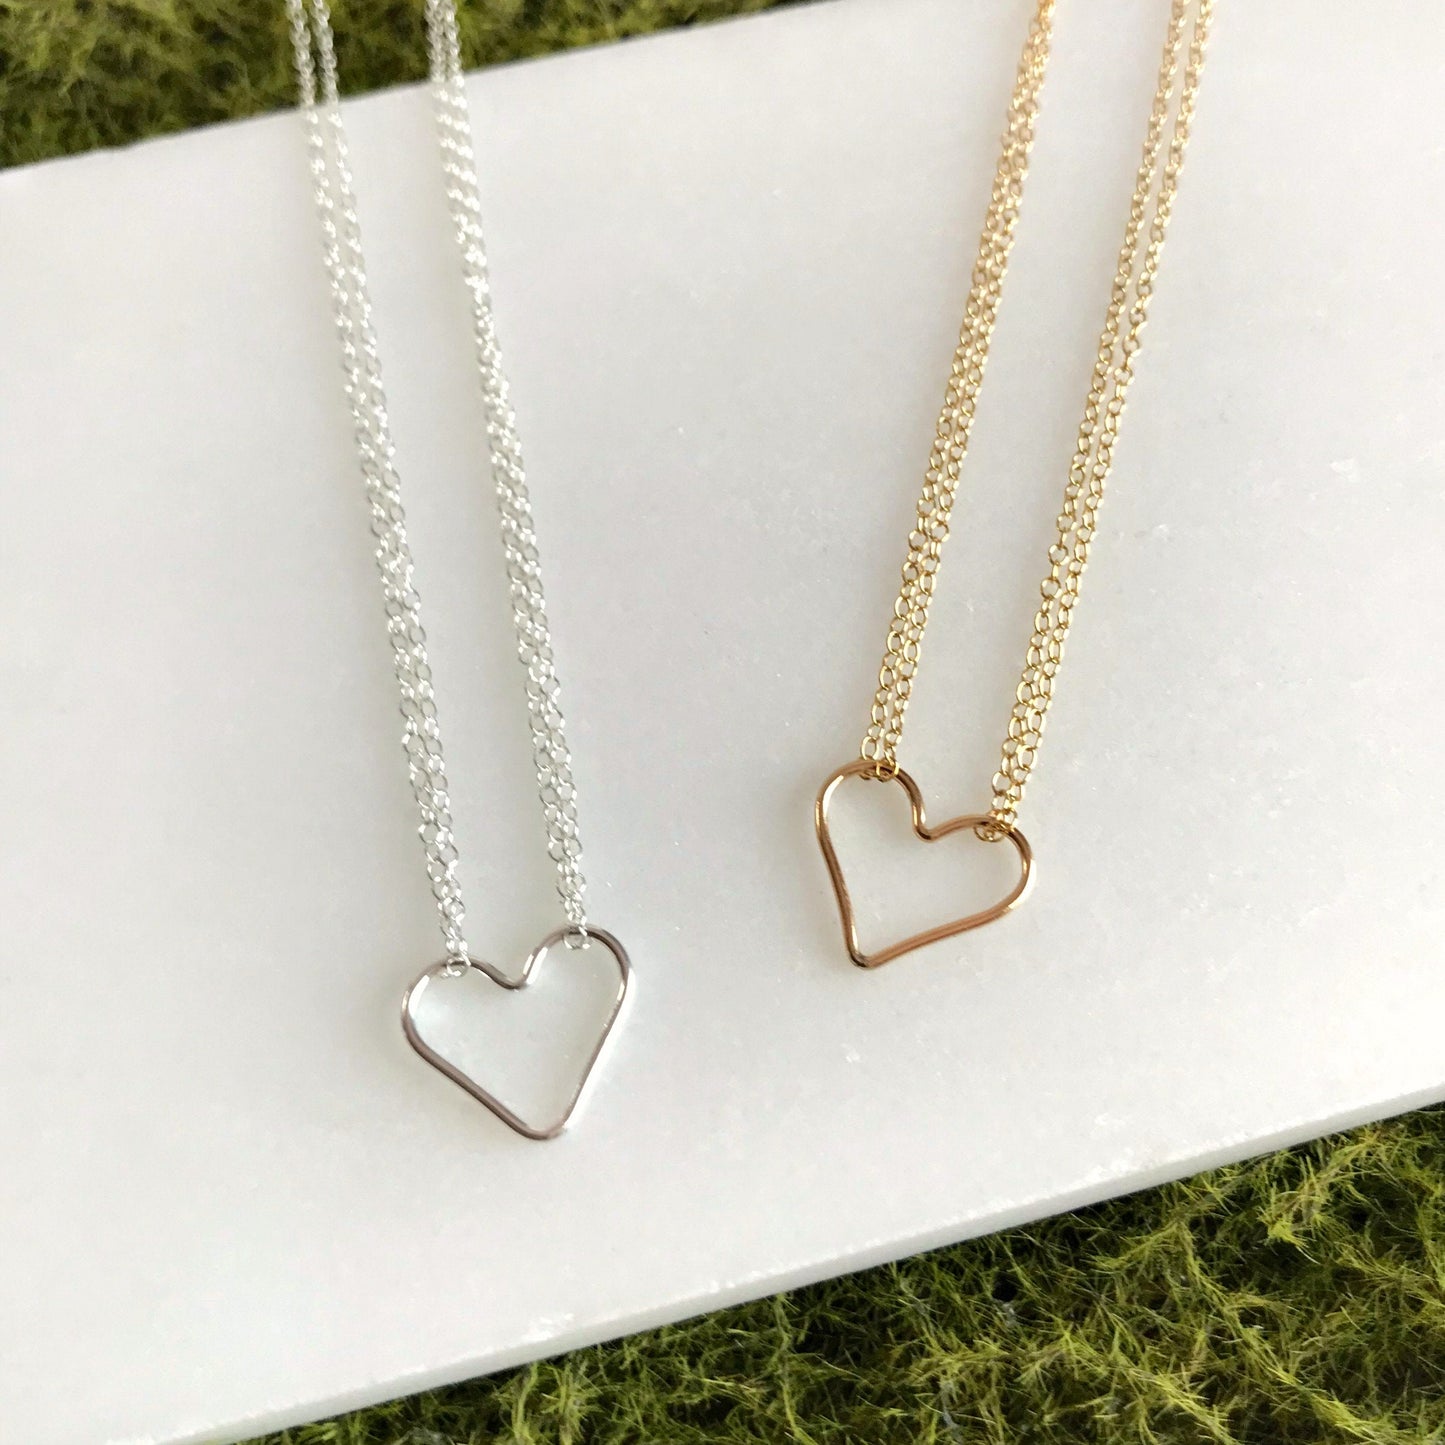 Heart necklace Heart Link Heart Jewelry Silver Heart Gold Heart Dainty Necklace Layering Necklace Necklace for Mom Everyday Necklace